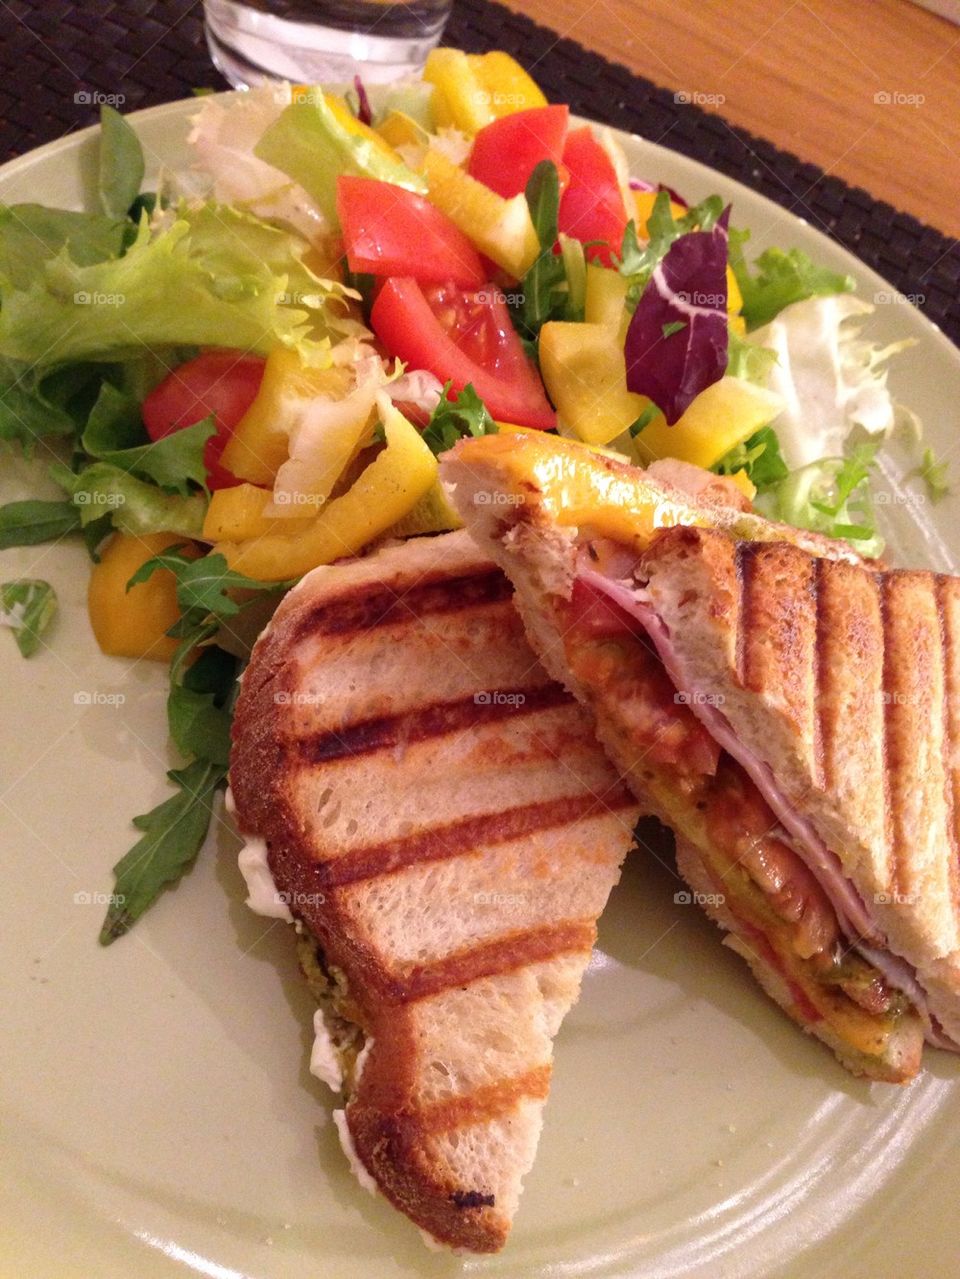 Grilled sandwich and salad